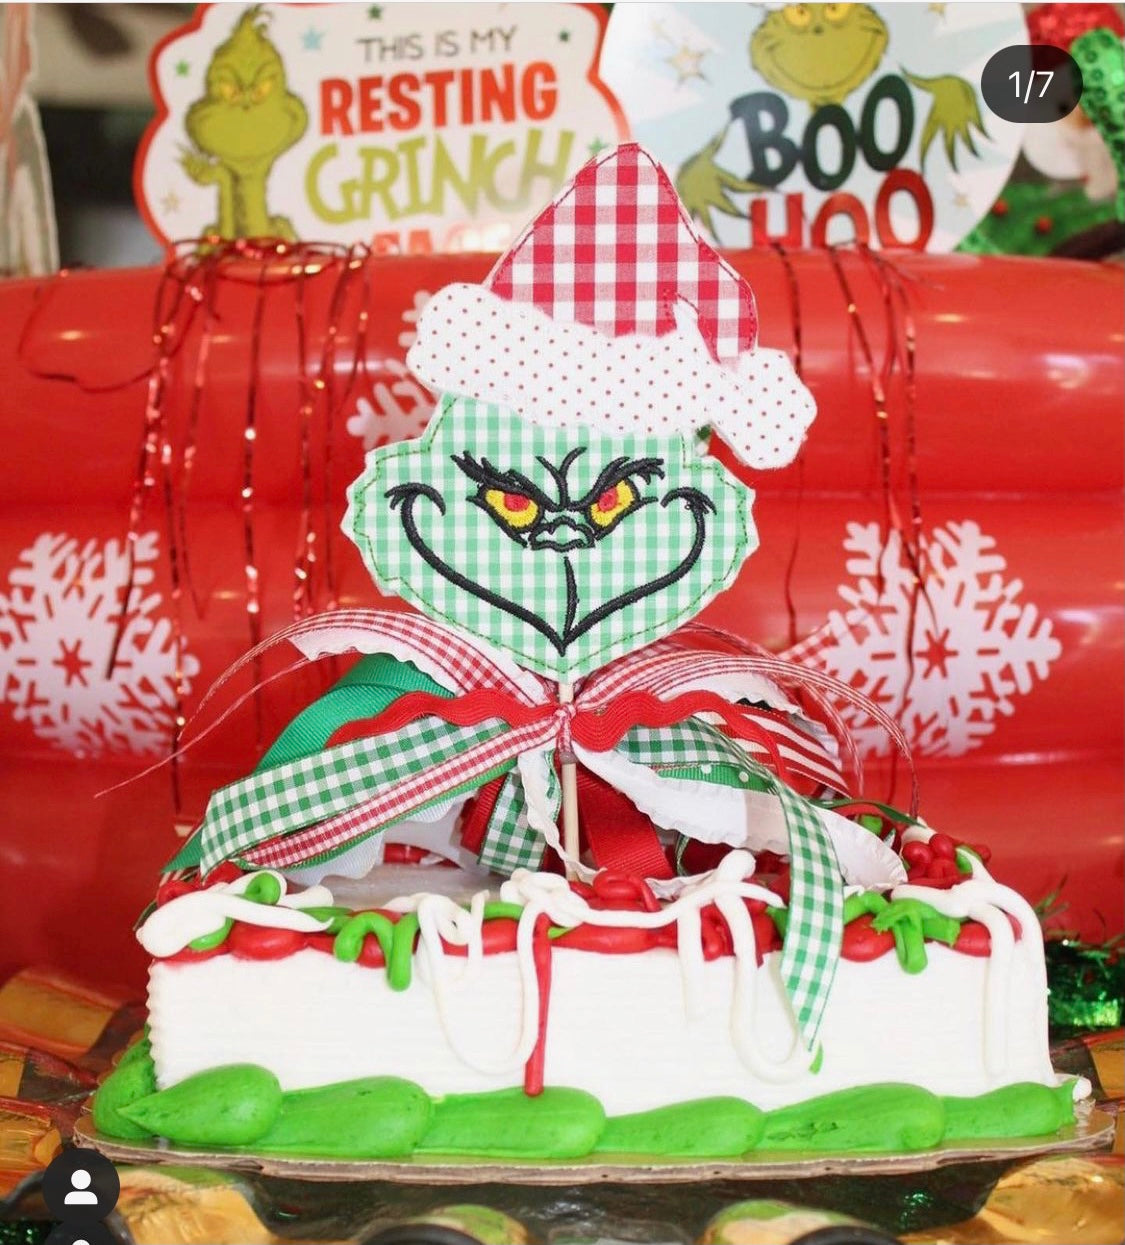 The Grinch Cake Topper